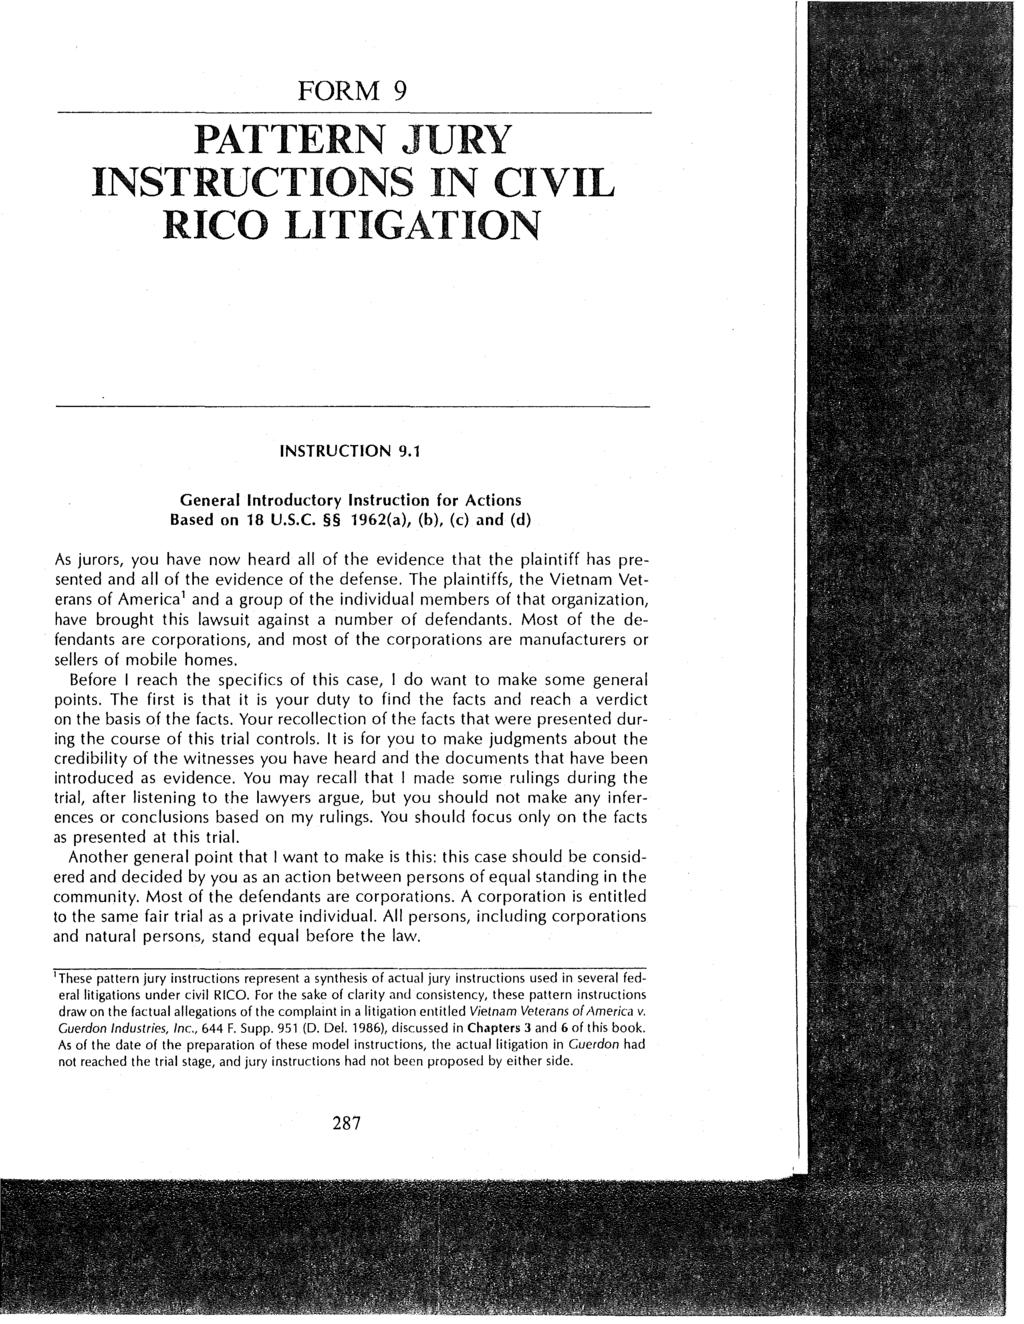 FORM 9 PATTERN JURY INSTRUCTIONS IN CIVIL RICO LITIGATION INSTRUCTION 9.1 General Introductory Instruction for Actions Based on 18 U.S.C. 1962(a), (b), (c) and (d) As jurors, you have now heard all of the evidence that the plaintiff has presented and all of the evidence of the defense.